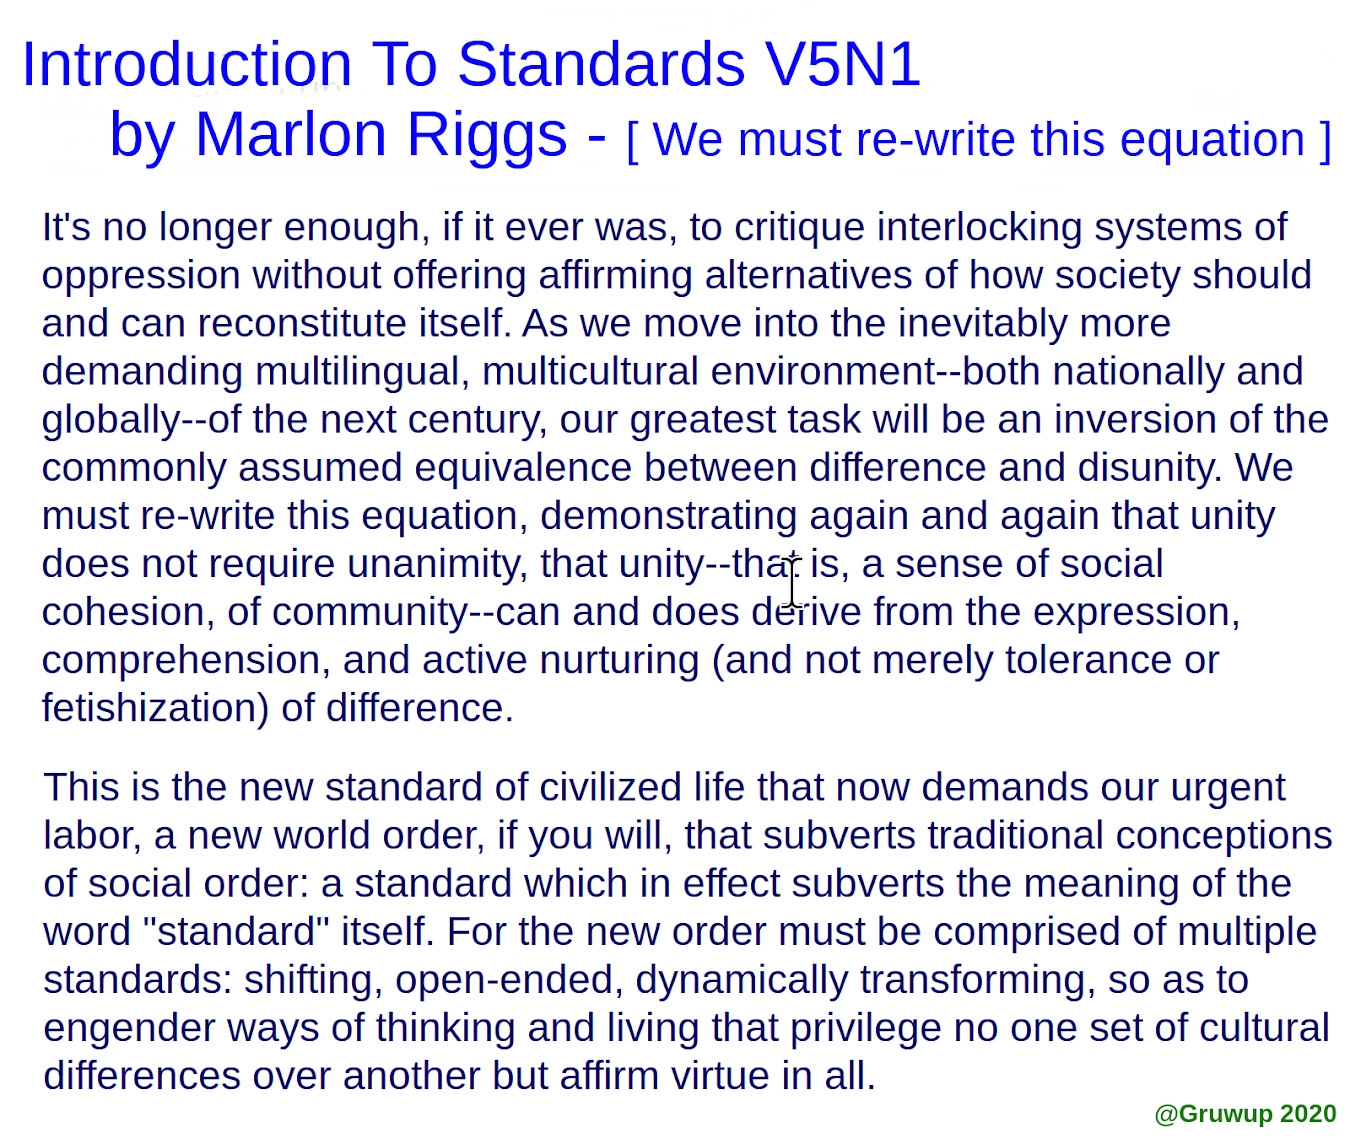 Introduction_To_Standards_V5N1_-_We_must_re-write_this_equation.png